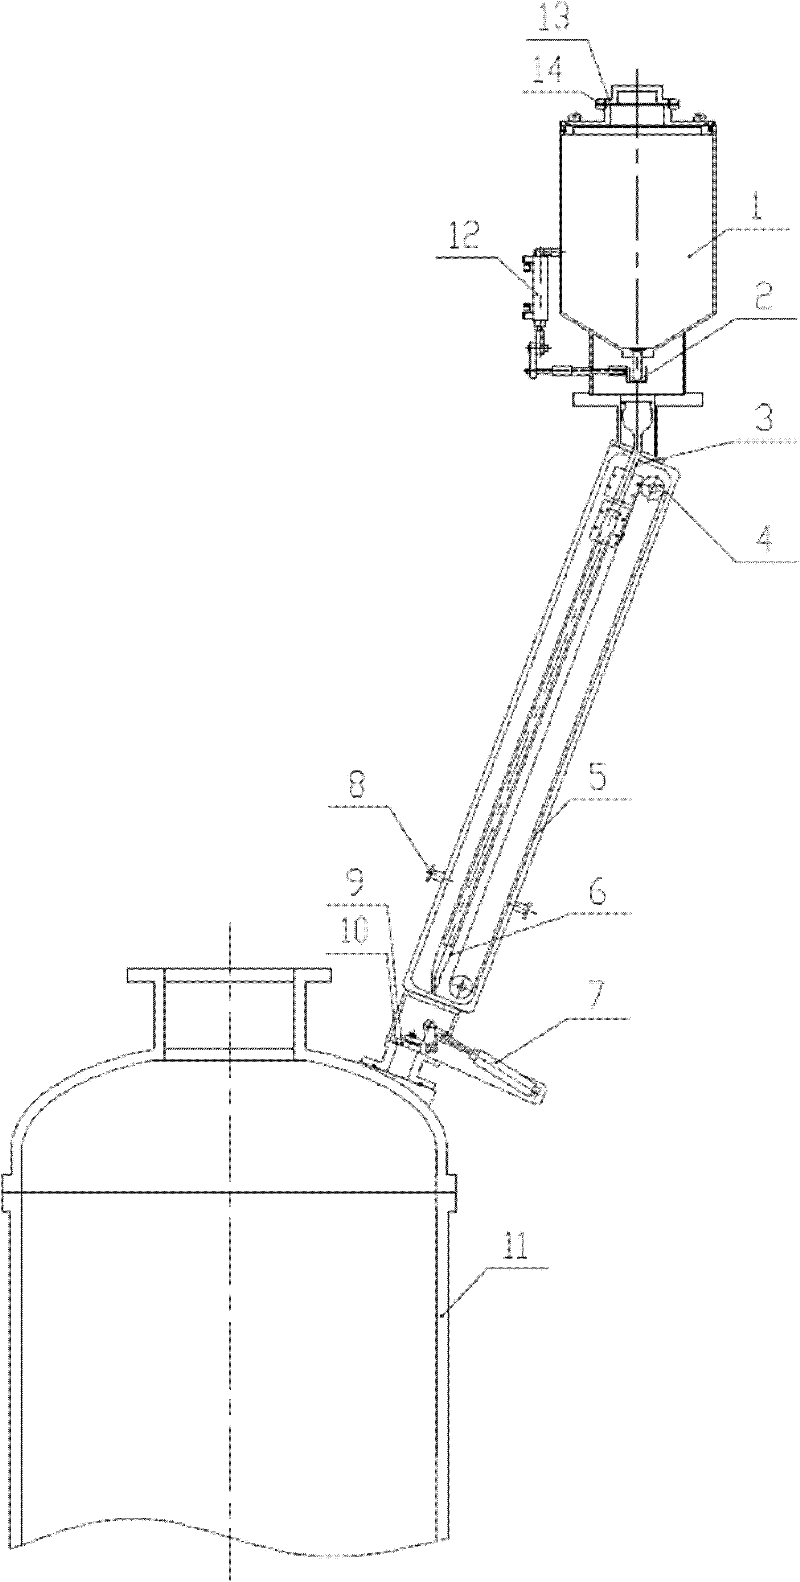 External continuous feeding mechanism for monocrystal furnace